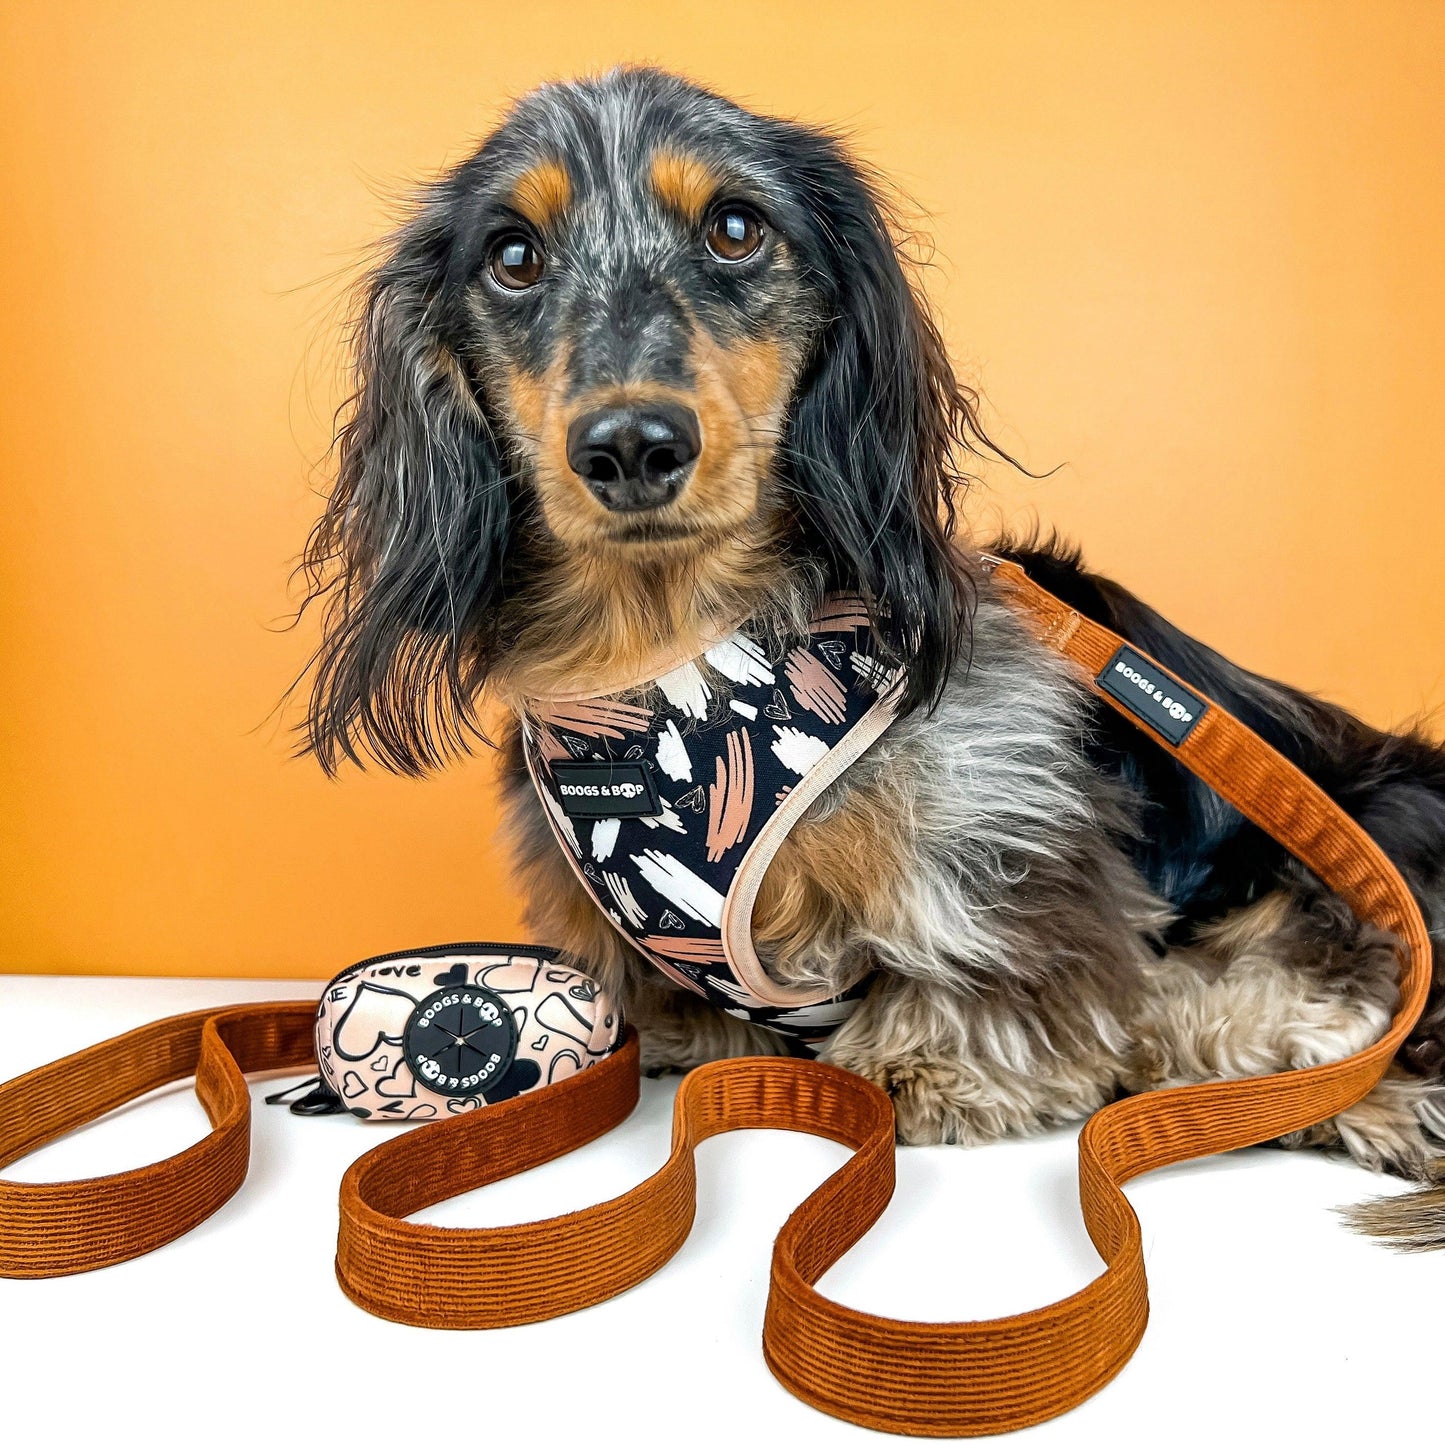 Dachshund Wearing Boogs & Boop Signature Harness Paired with Corduroy Leash - Rust